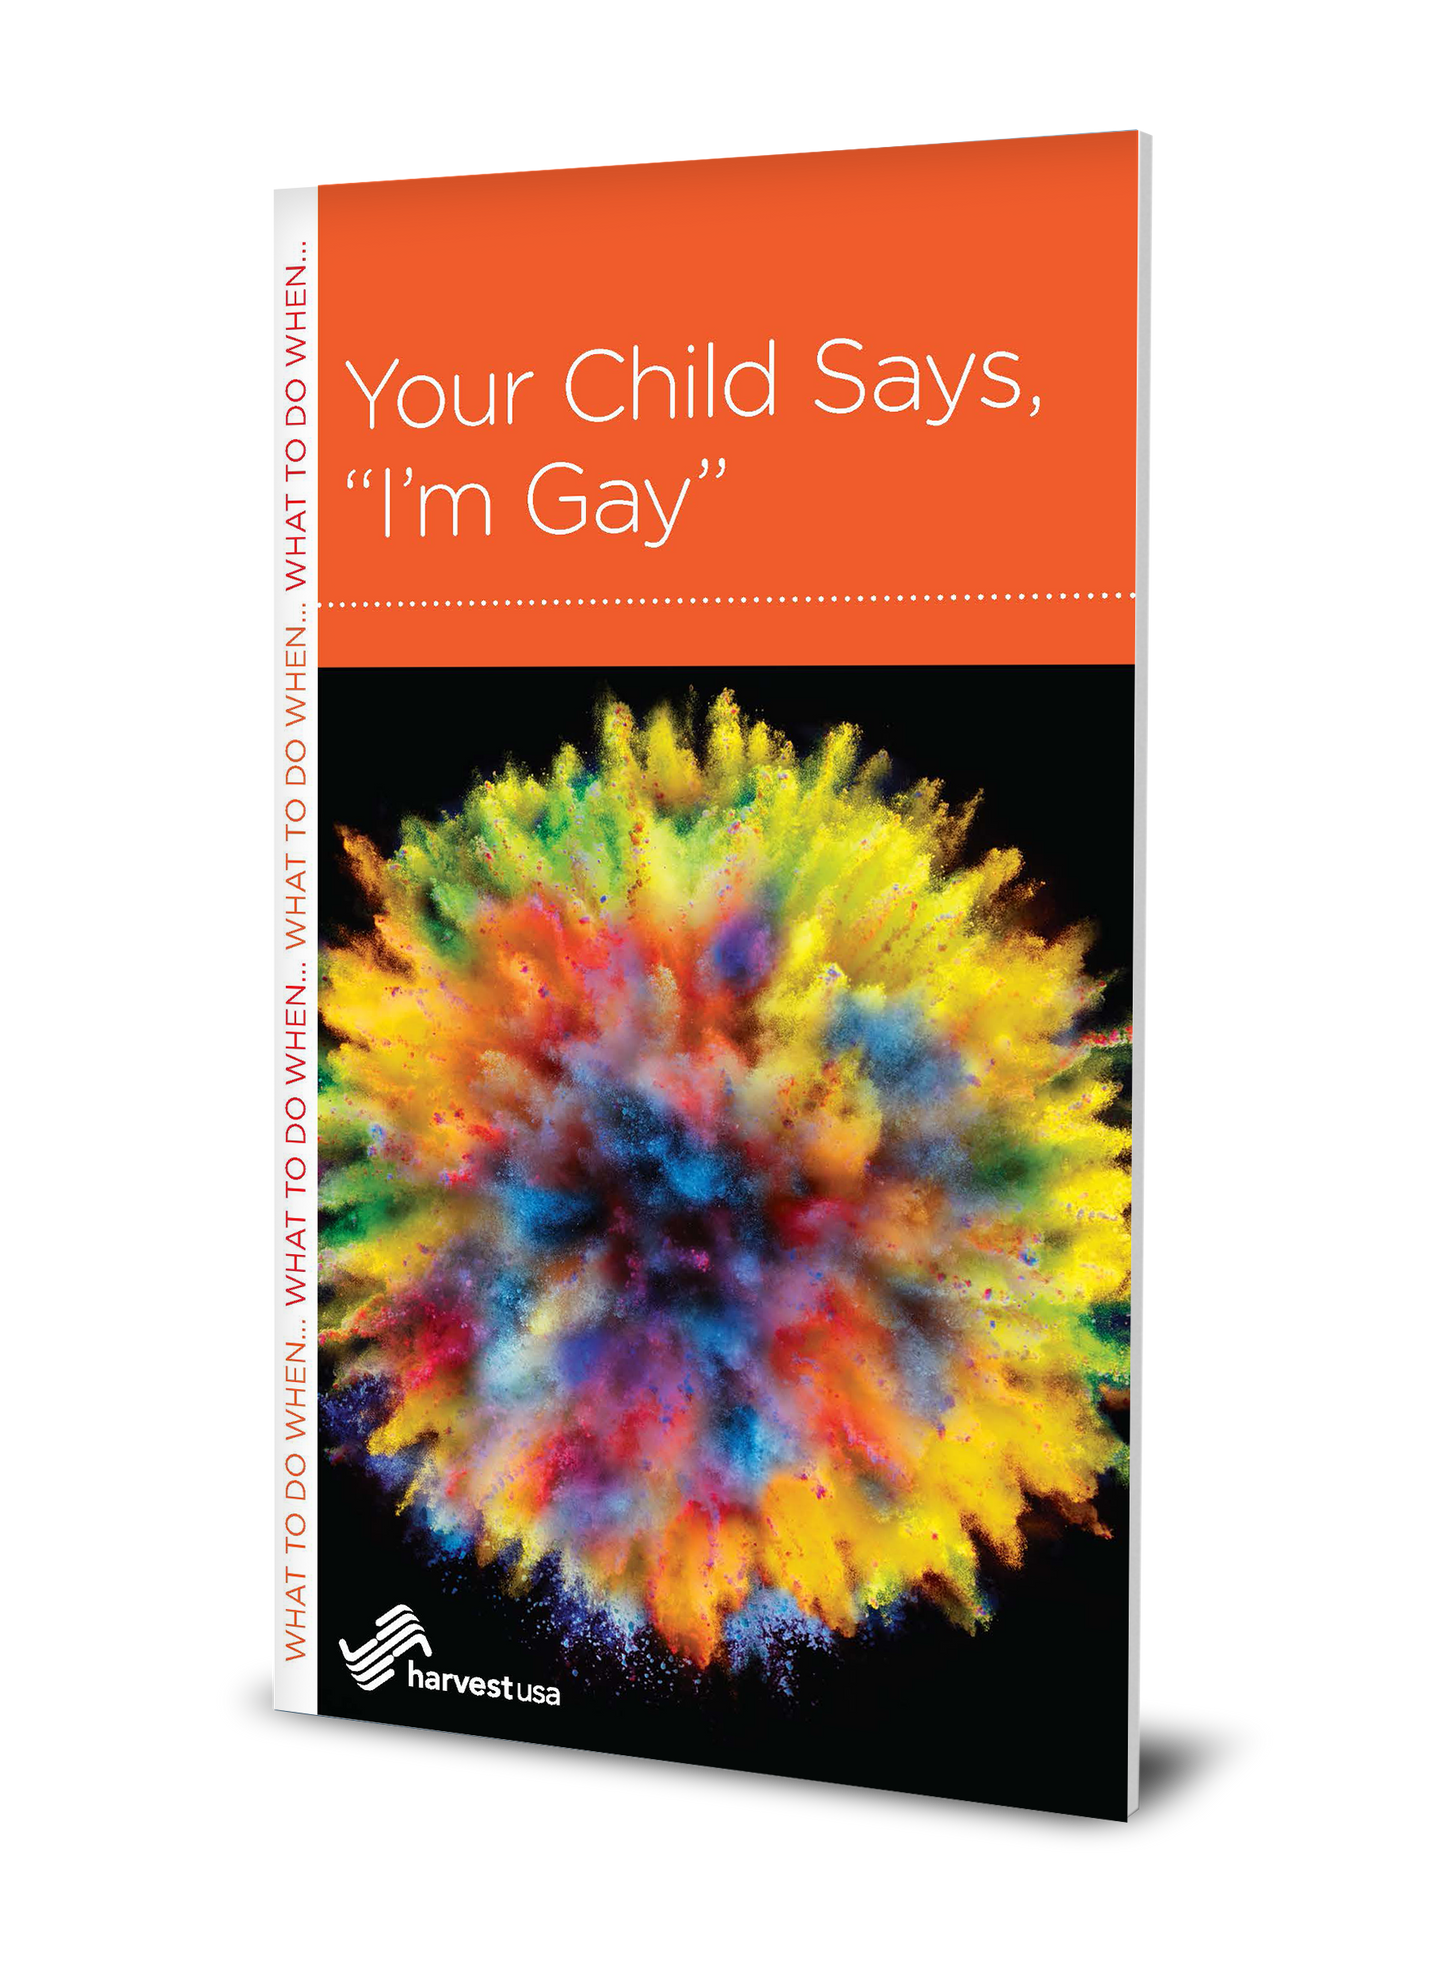 Your Child Says, "I'm Gay" (Minibook)